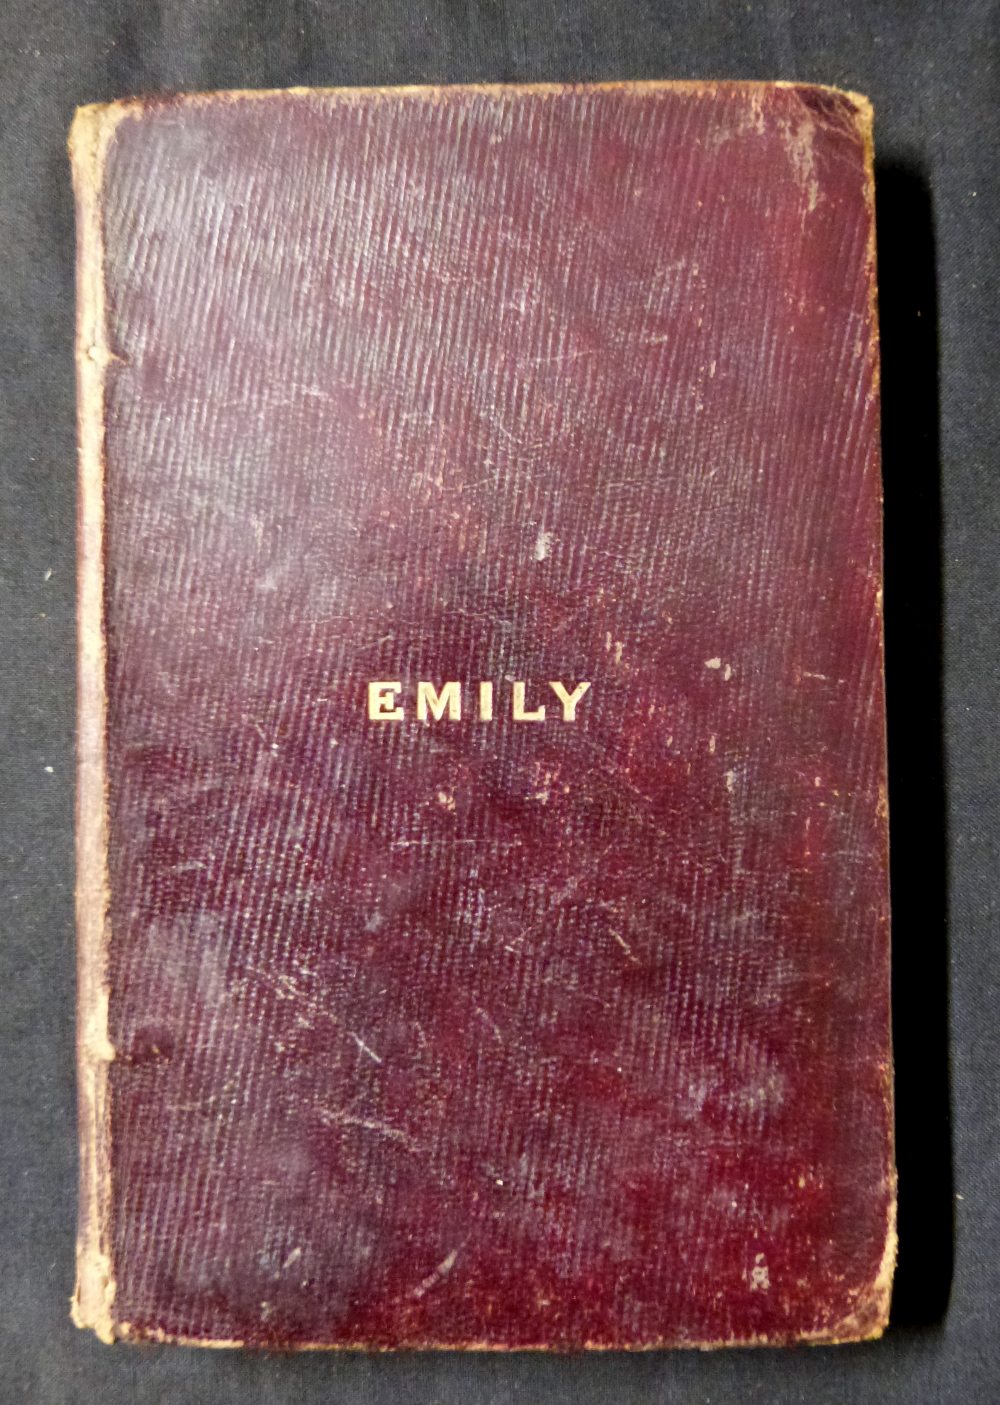 ANON: EMILY, A TALE FOR YOUNG PERSONS, London, John Harris, 1825 1st edition, engraved frontis, - Image 2 of 2